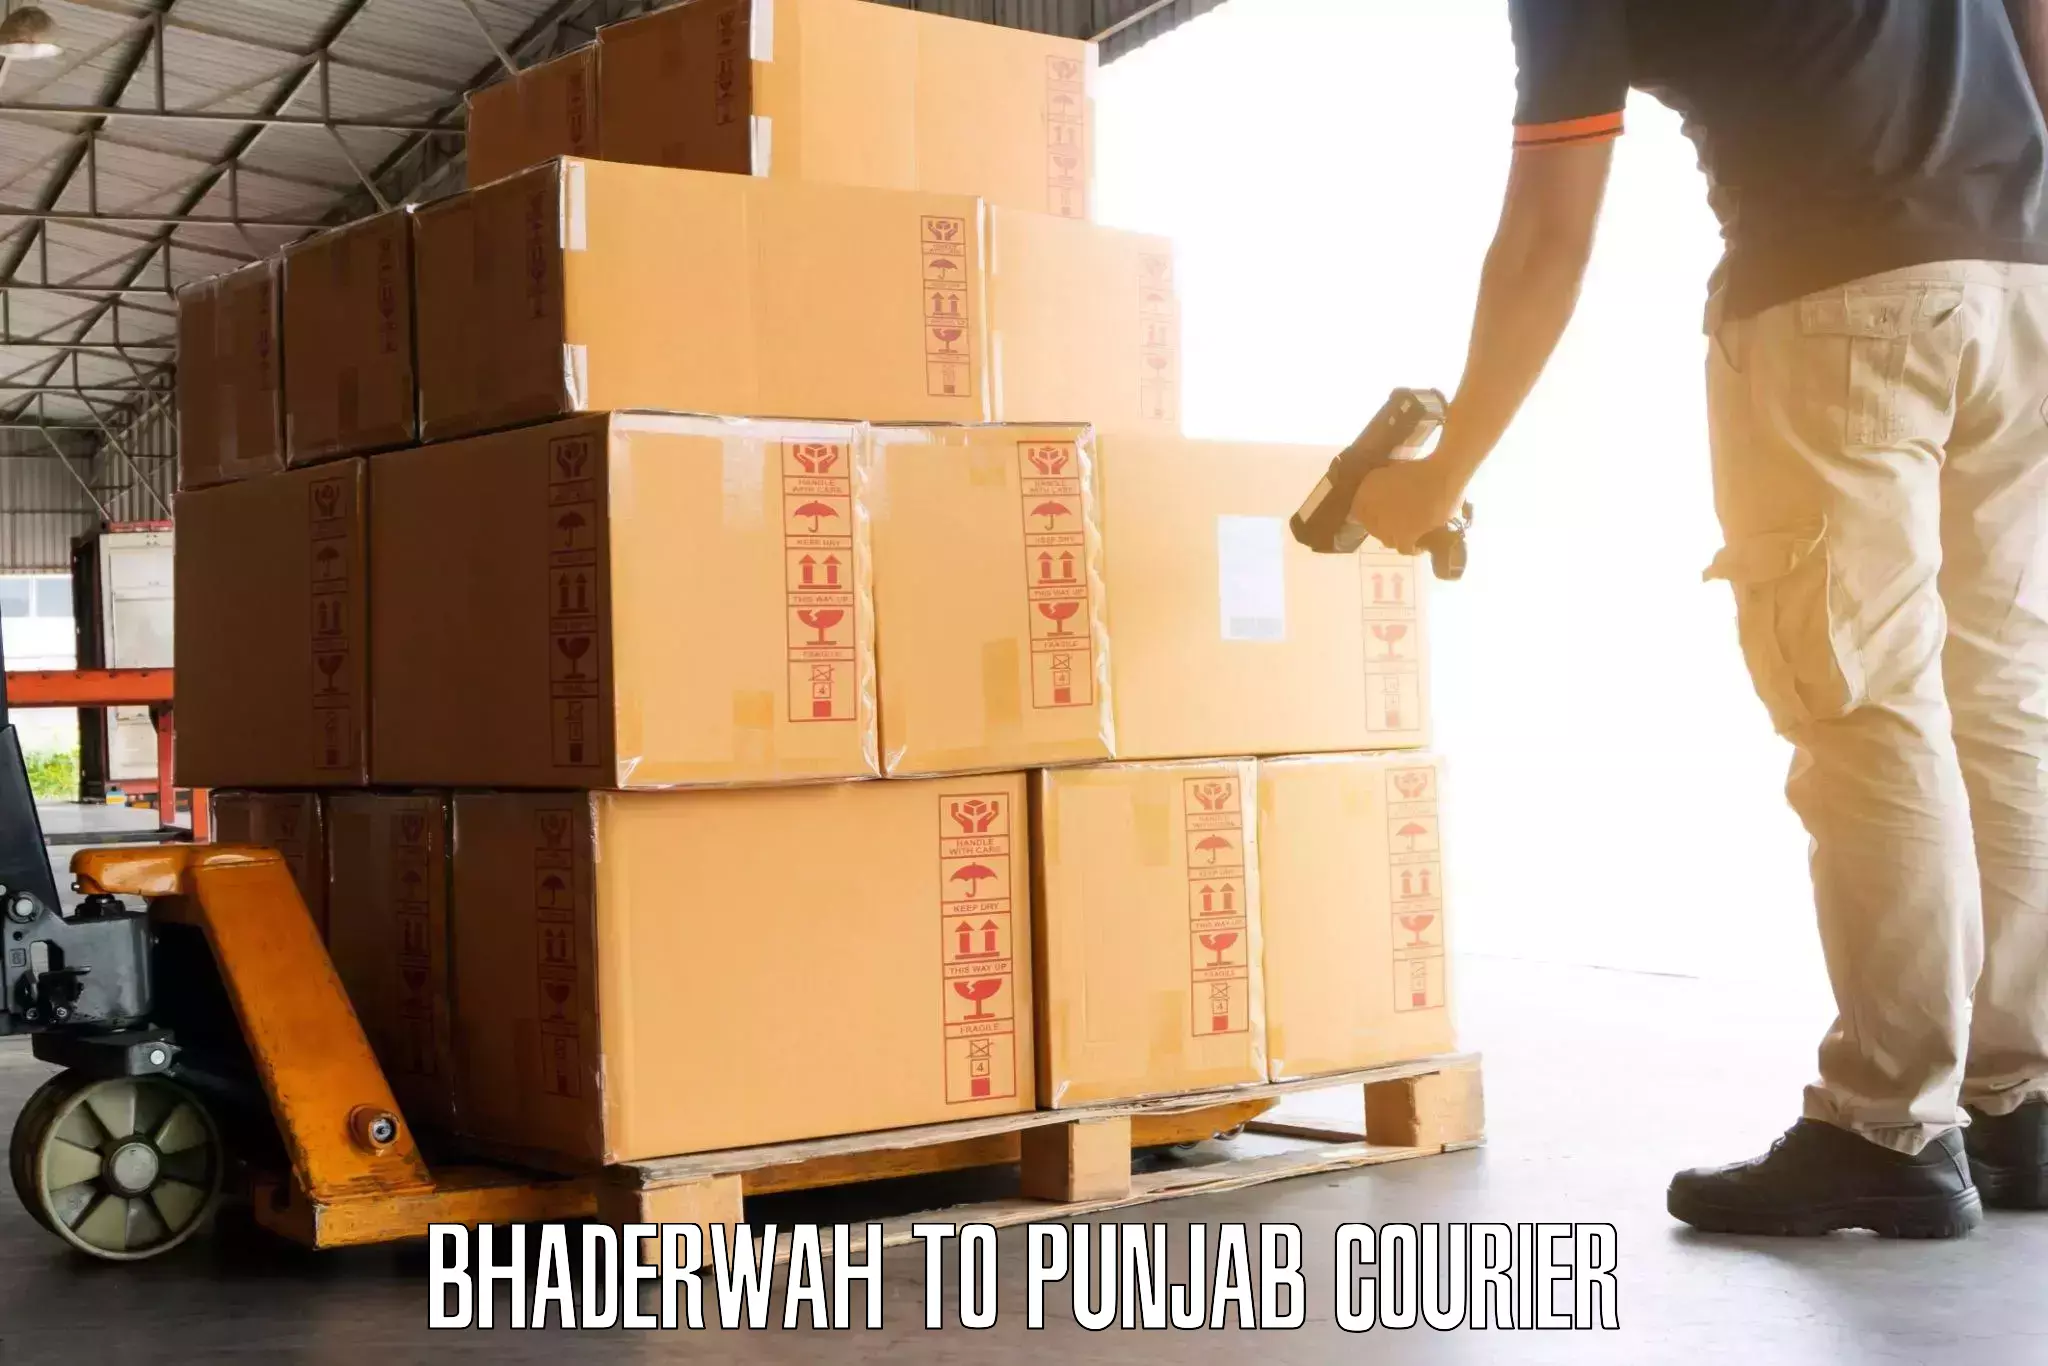 Luggage shipment specialists Bhaderwah to Punjab